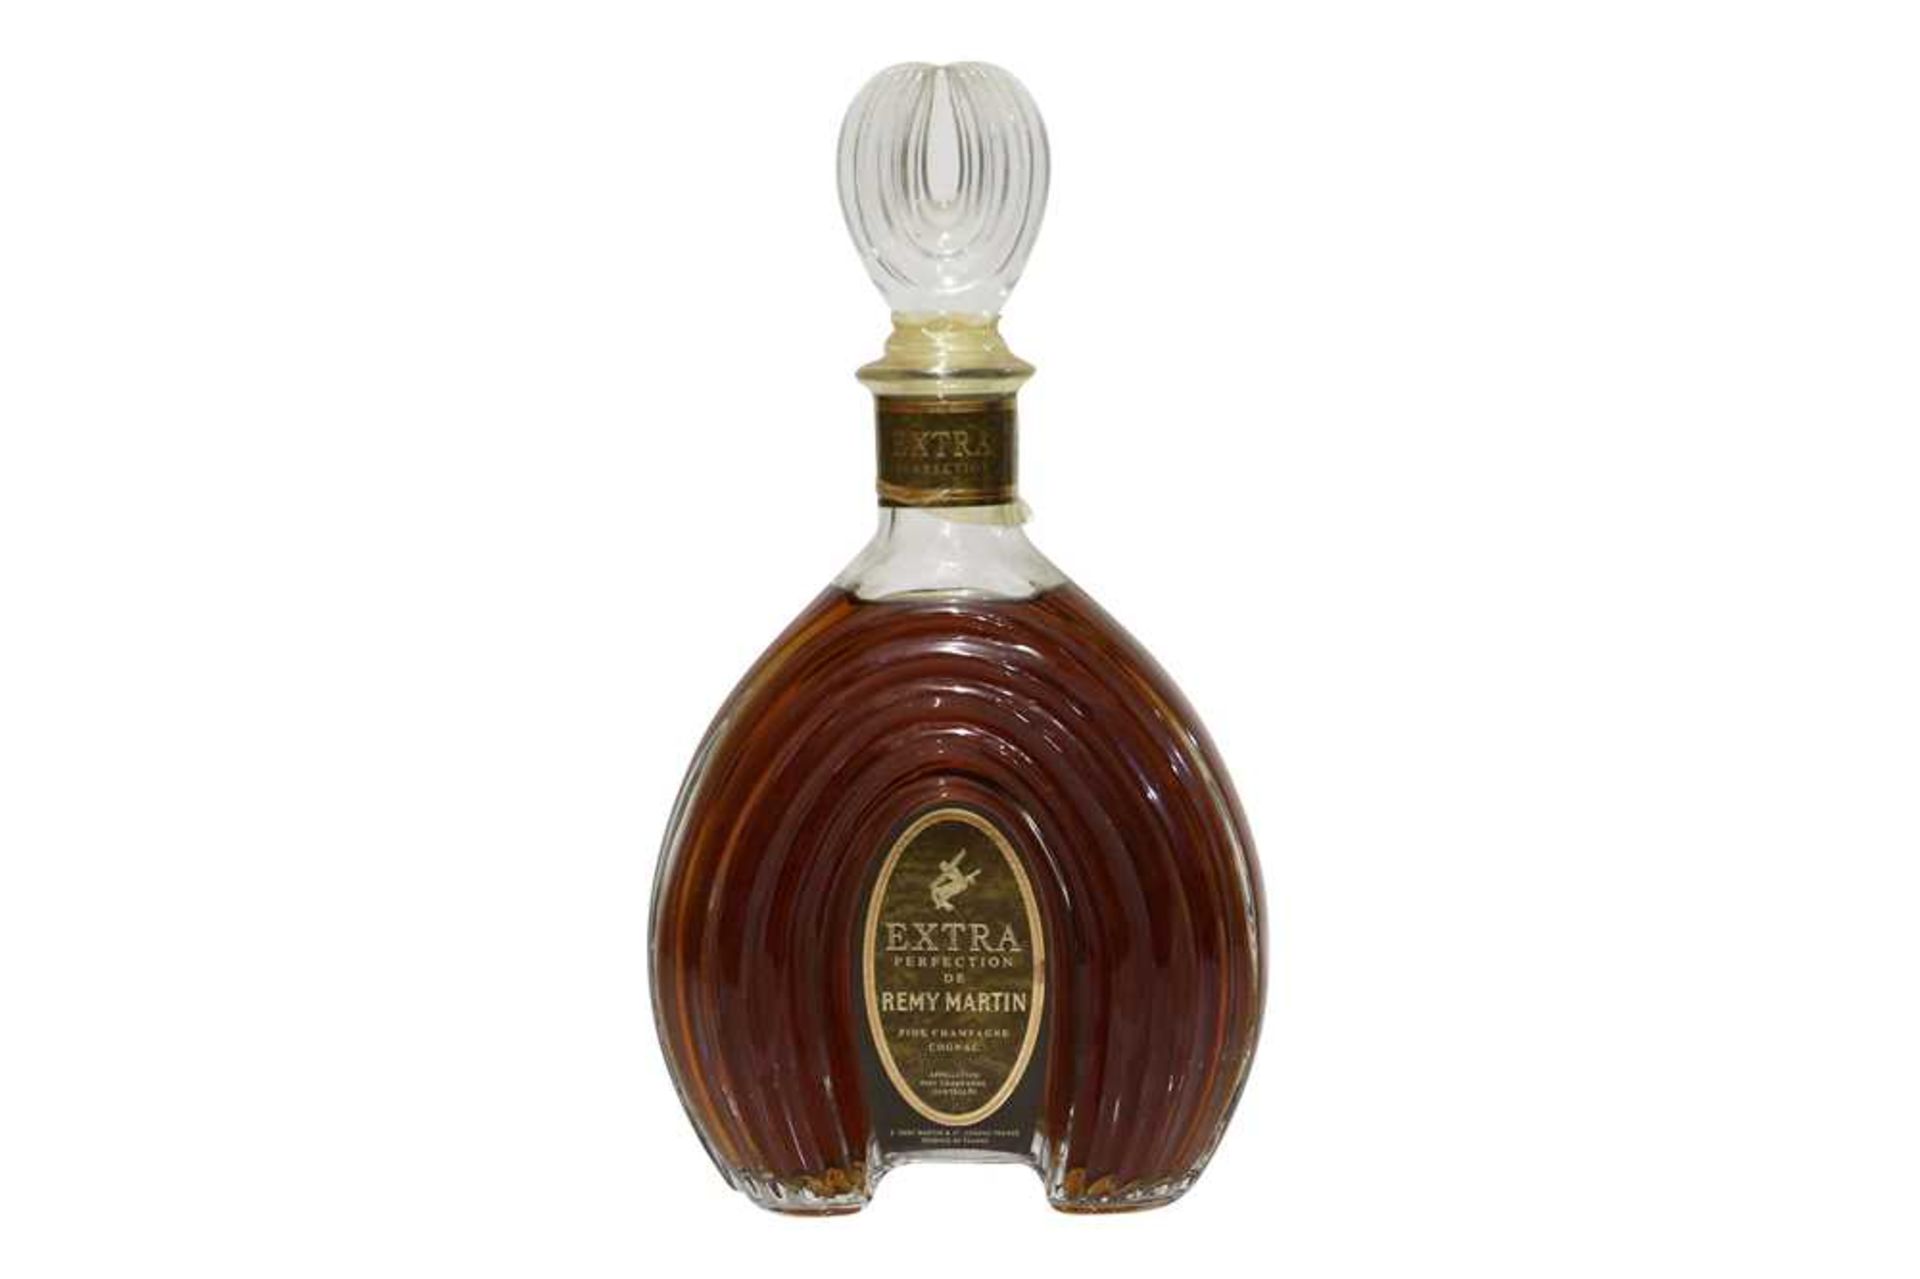 Remy Martin, Extra Perfection, Fine Champagne Cognac, one bottle